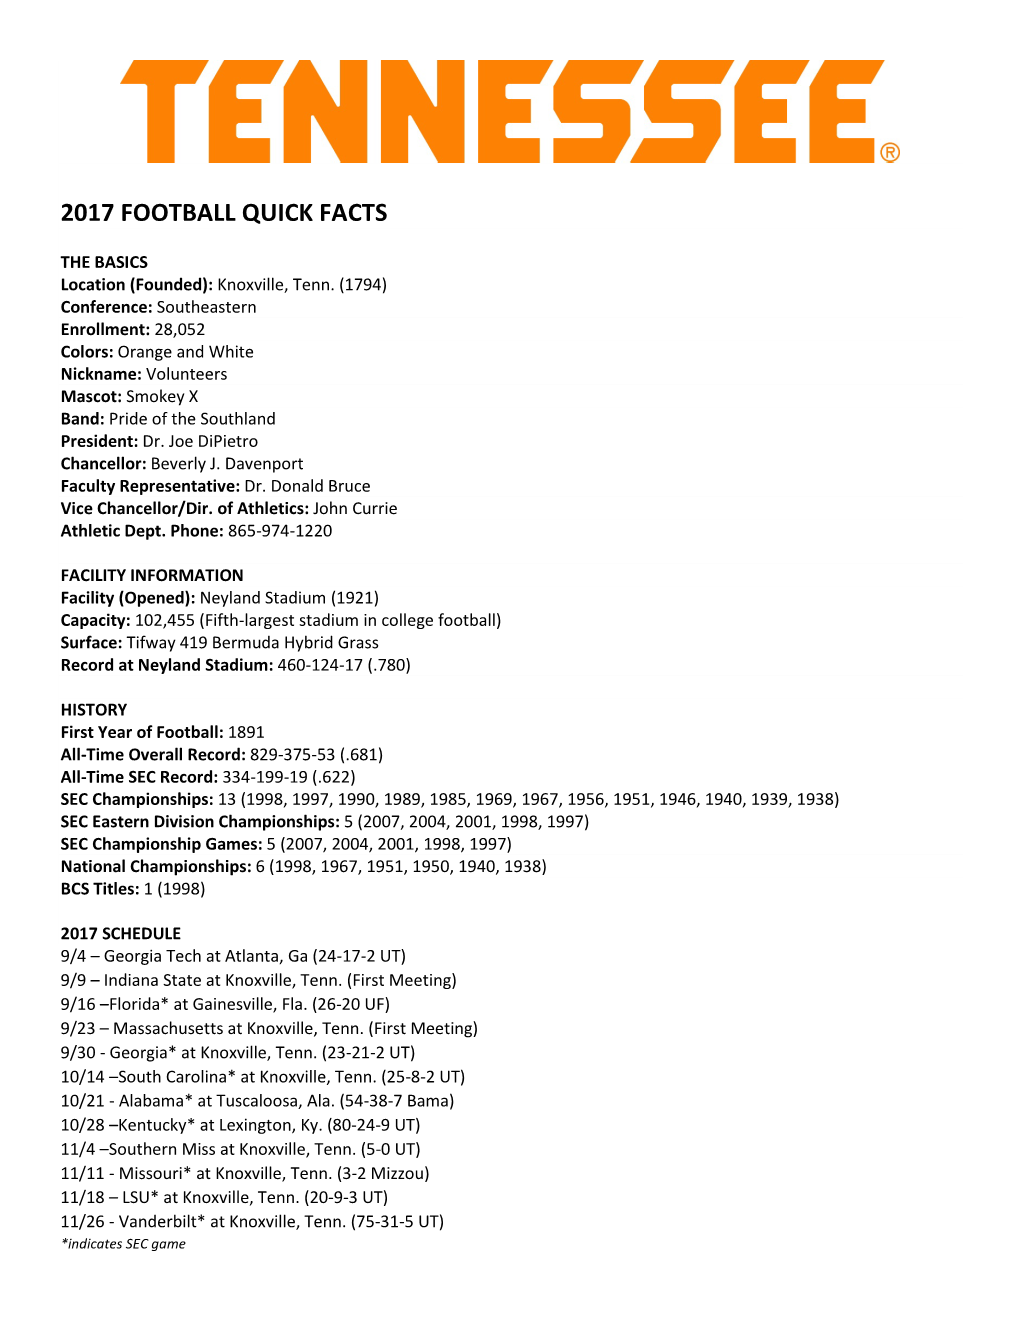 2017 Football Quick Facts